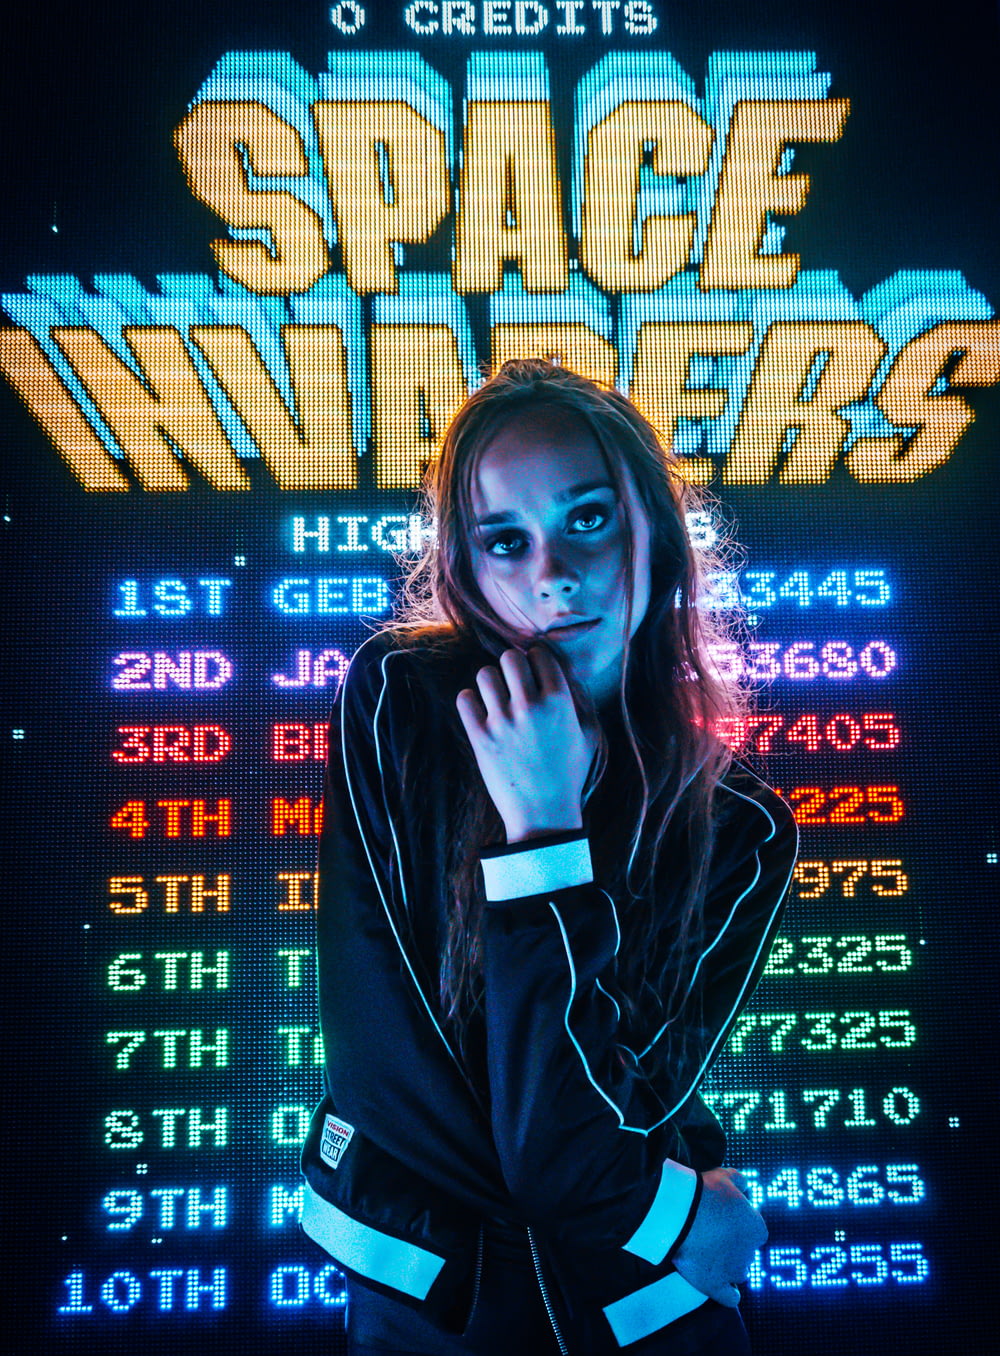 woman posing for photo in front of Space Invaders scoreboard